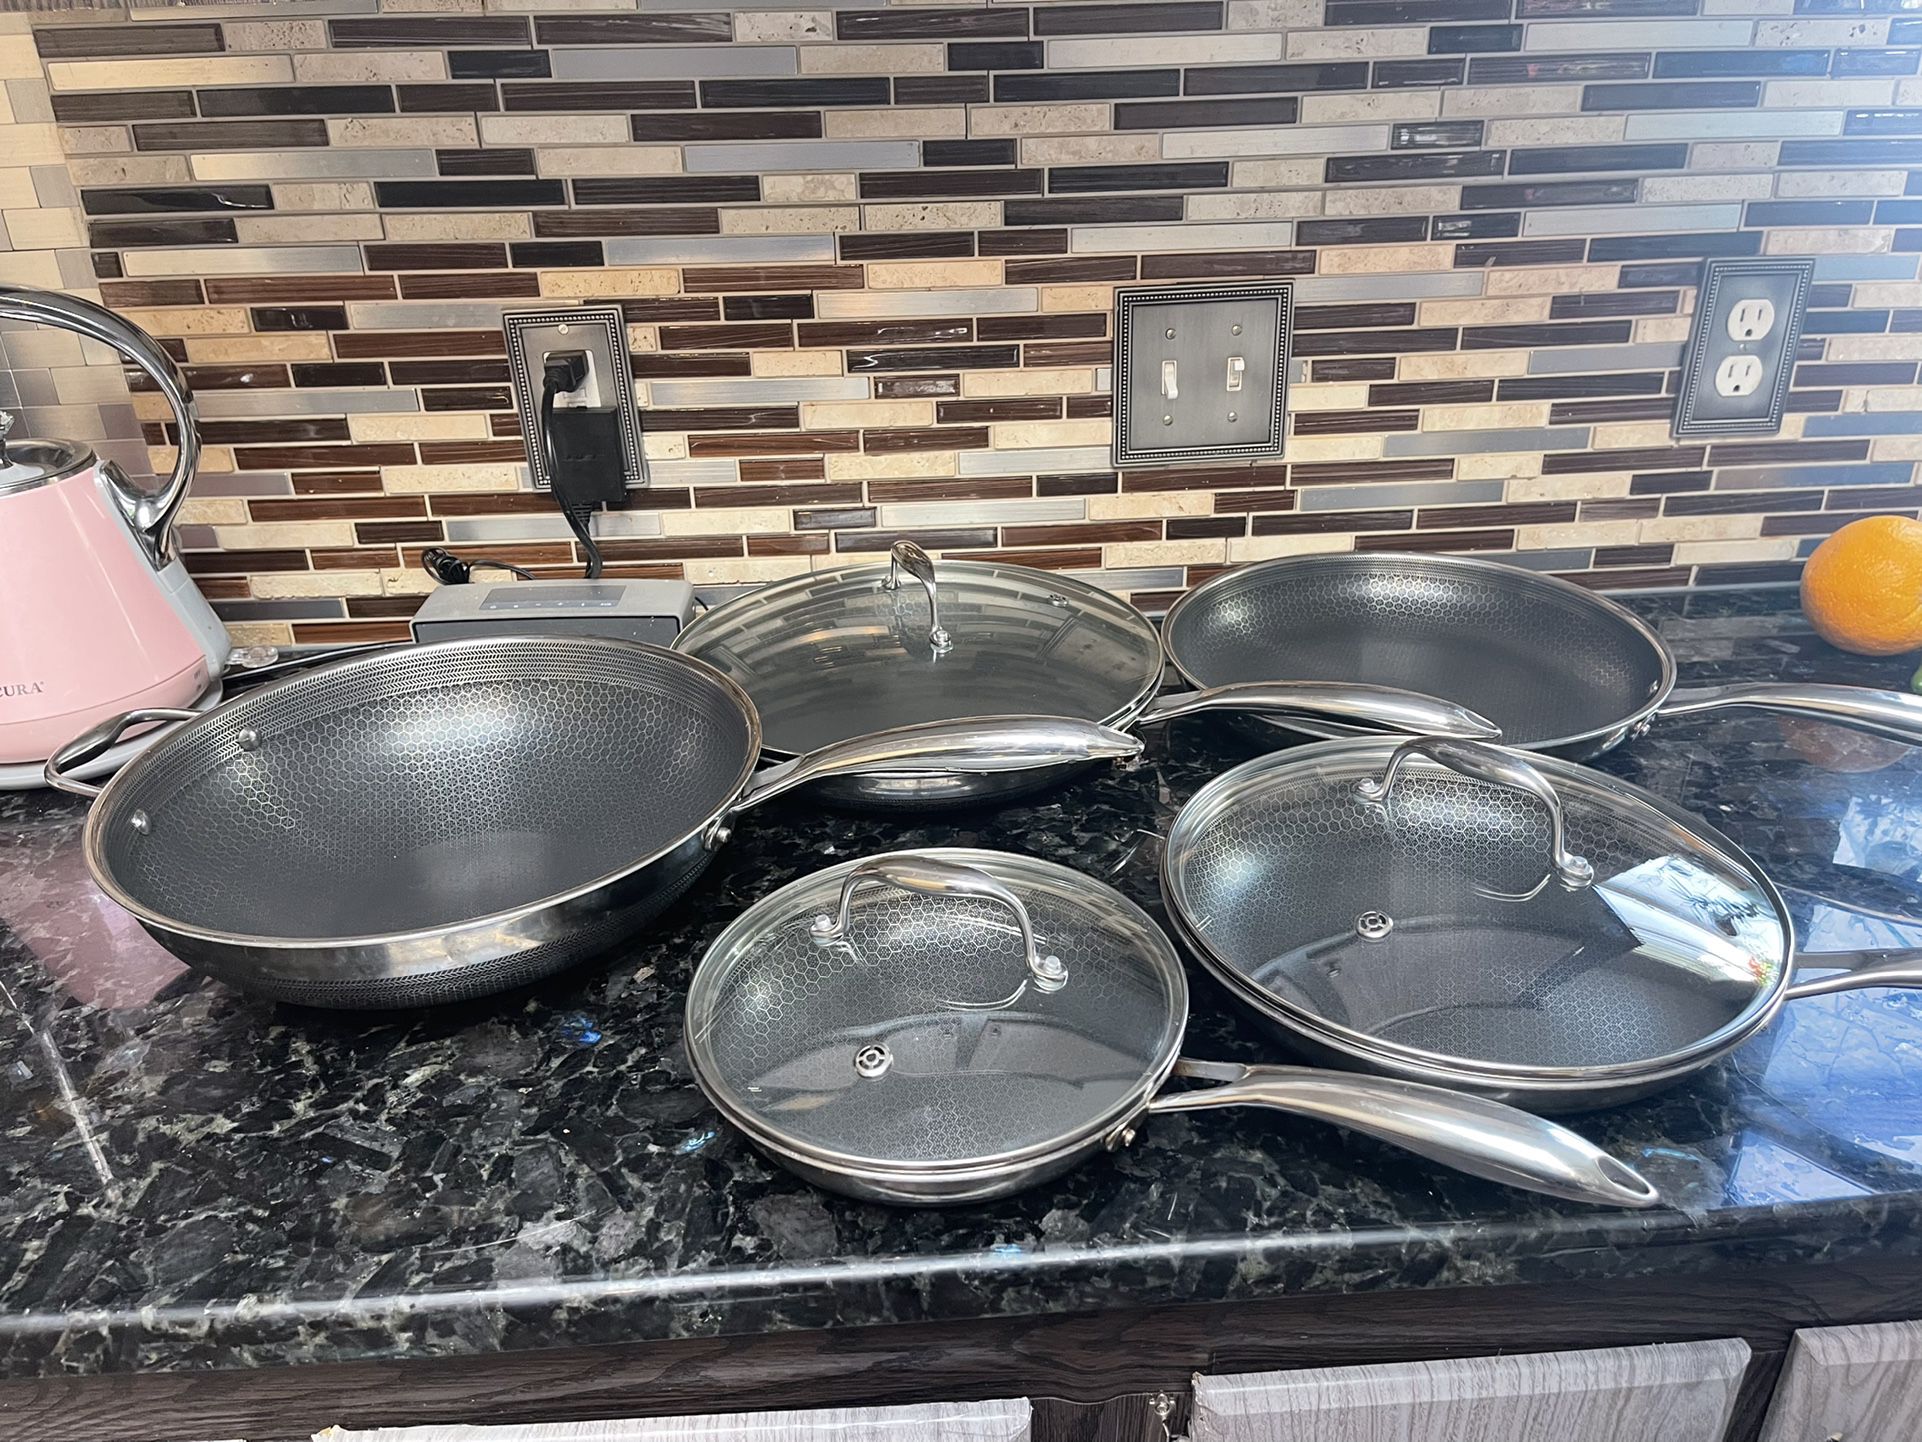 8 Piece hexclad Hybrid Cookware Set for Sale in Federal Way, WA